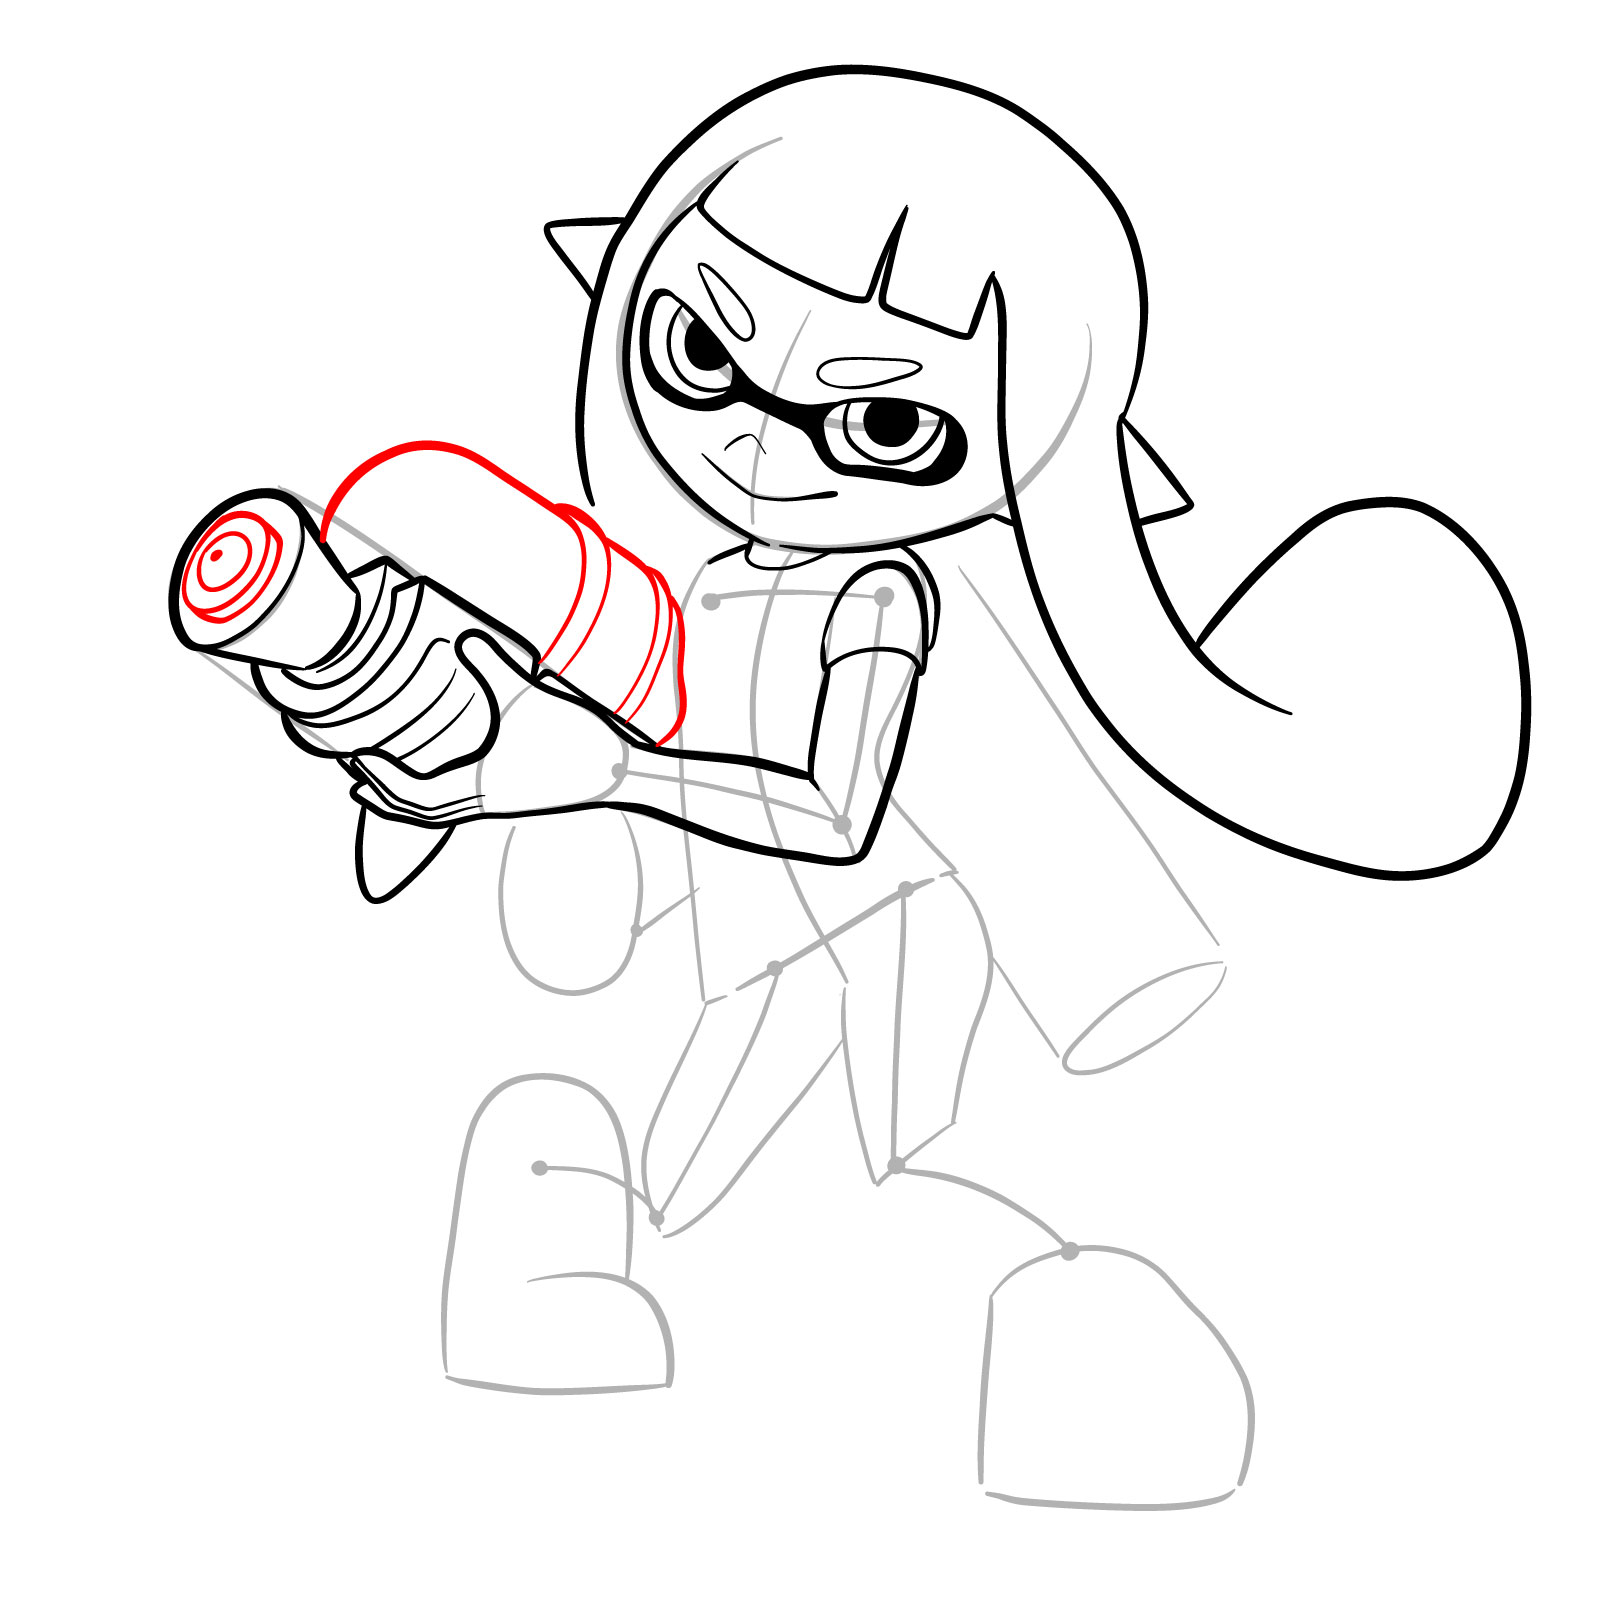 How to draw an Inkling Girl - step 18